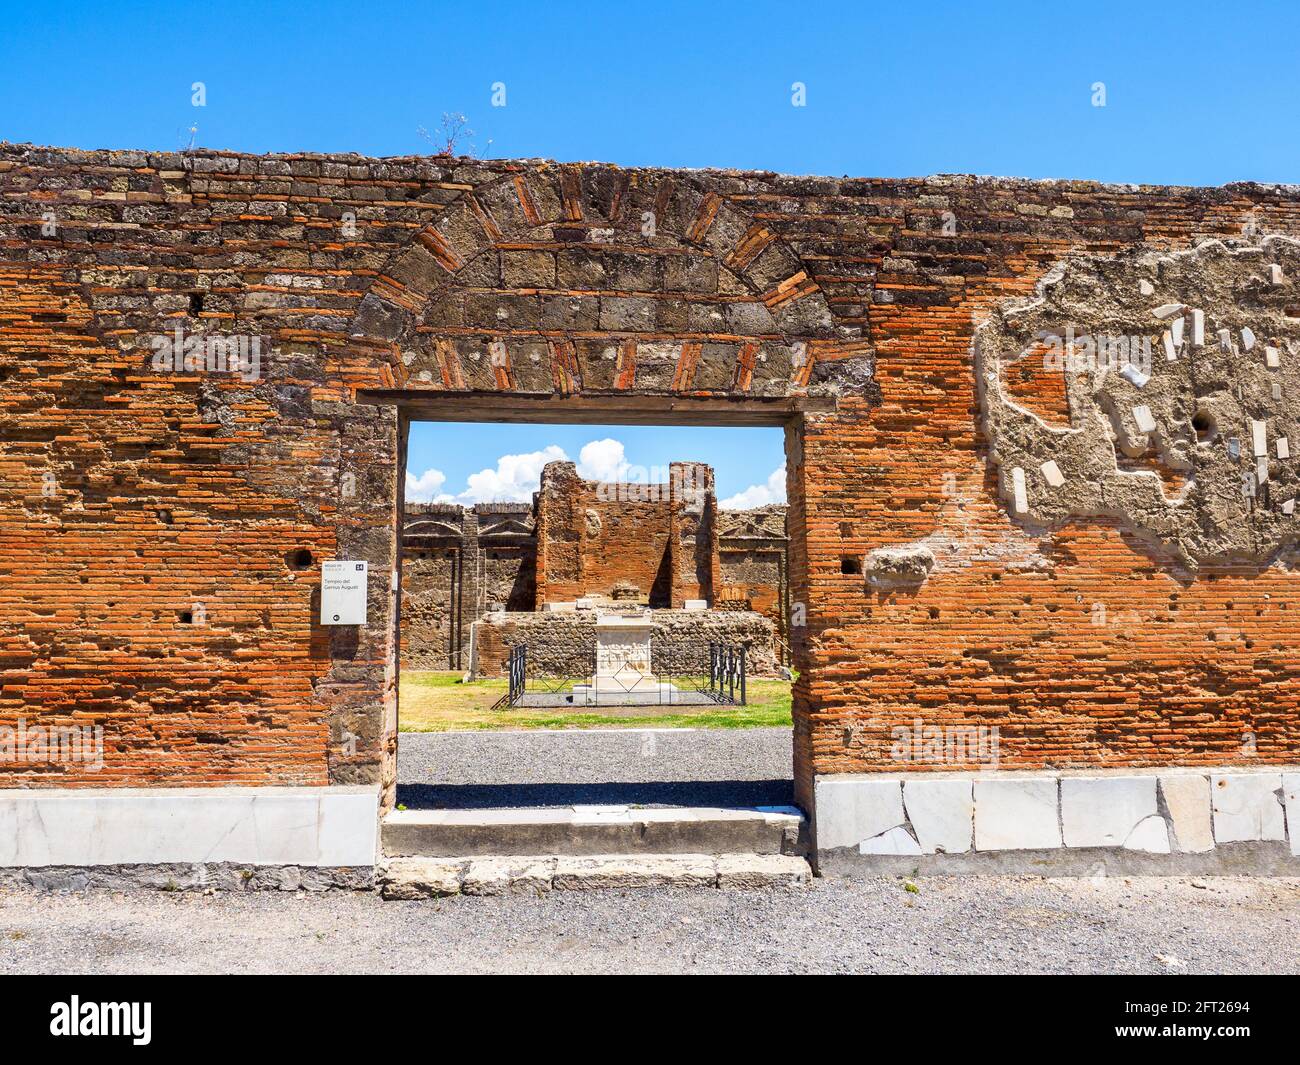 The Temple of the Genius Augusti, built upon the requests of Mamia, mentioned in an inscription as priestess of Cerere and of the Genius of Augustus.  Built i the first decade of the 1st century AD - Pompeii archaeological site, Italy Stock Photo